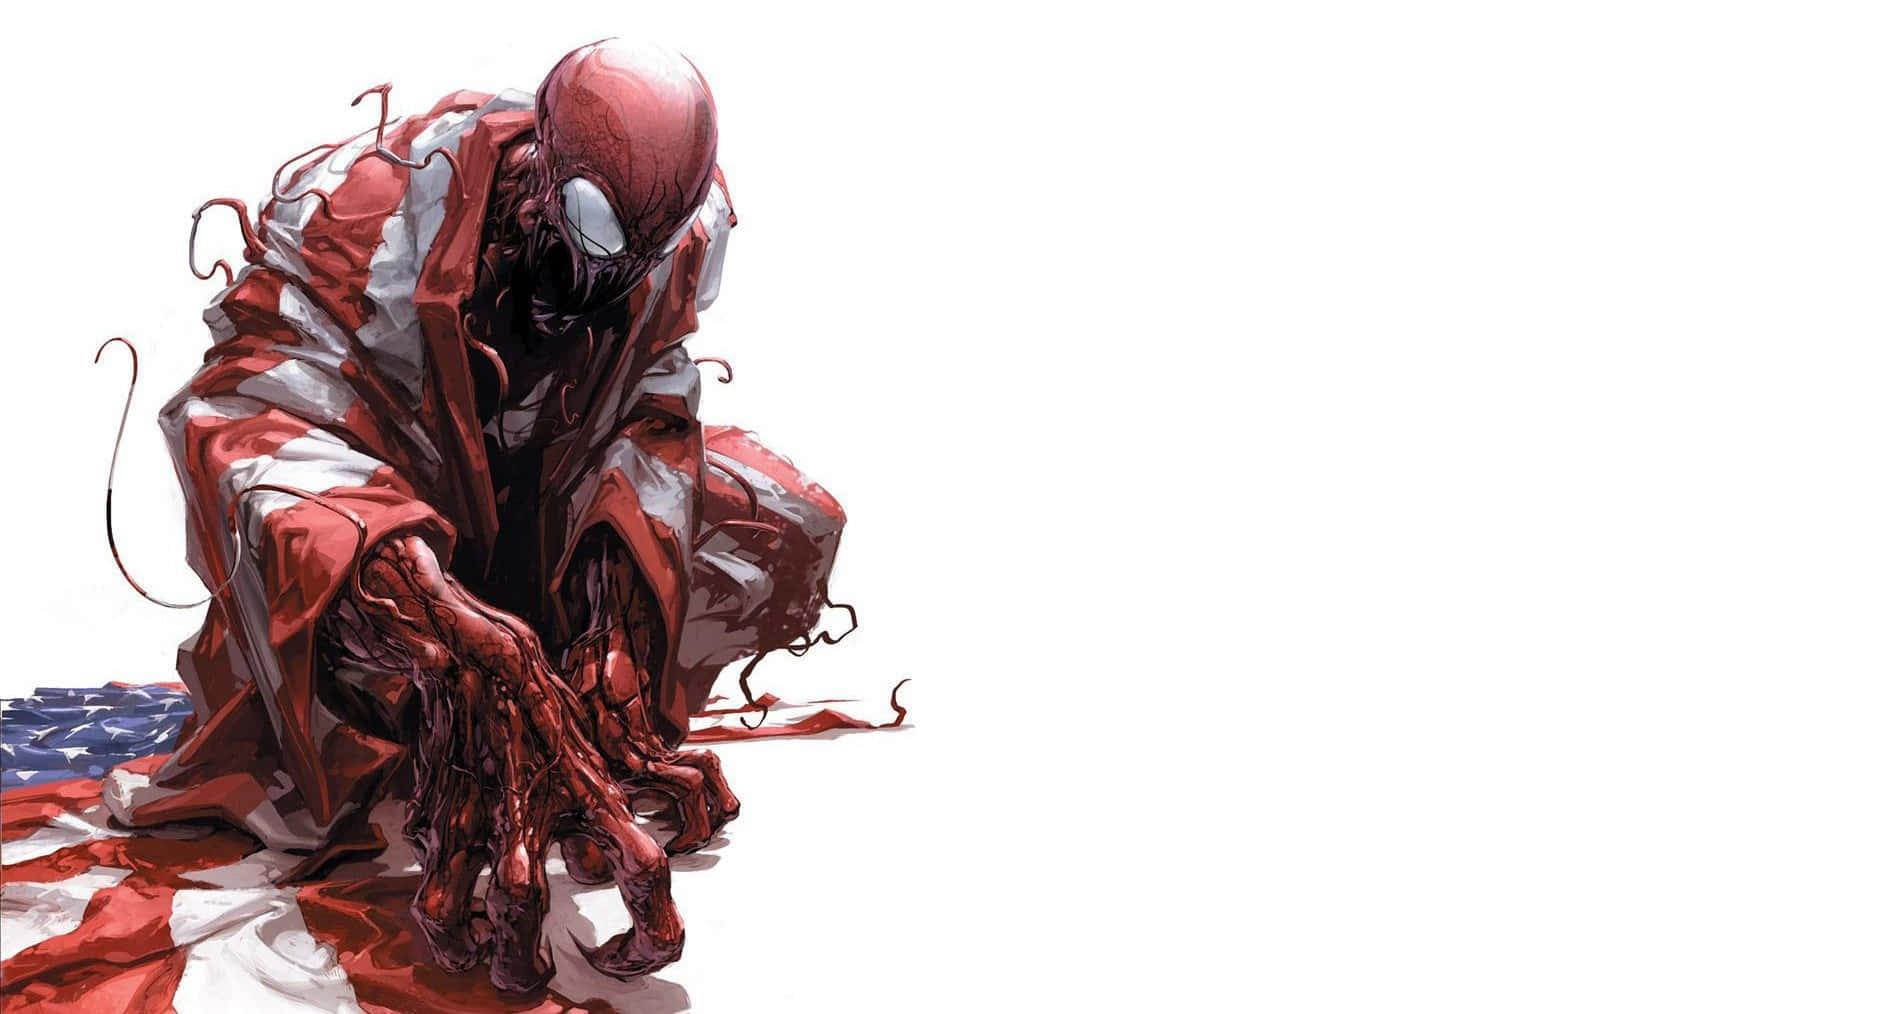 Spider-Man and Venom team up against Carnage in Maximum Carnage Wallpaper